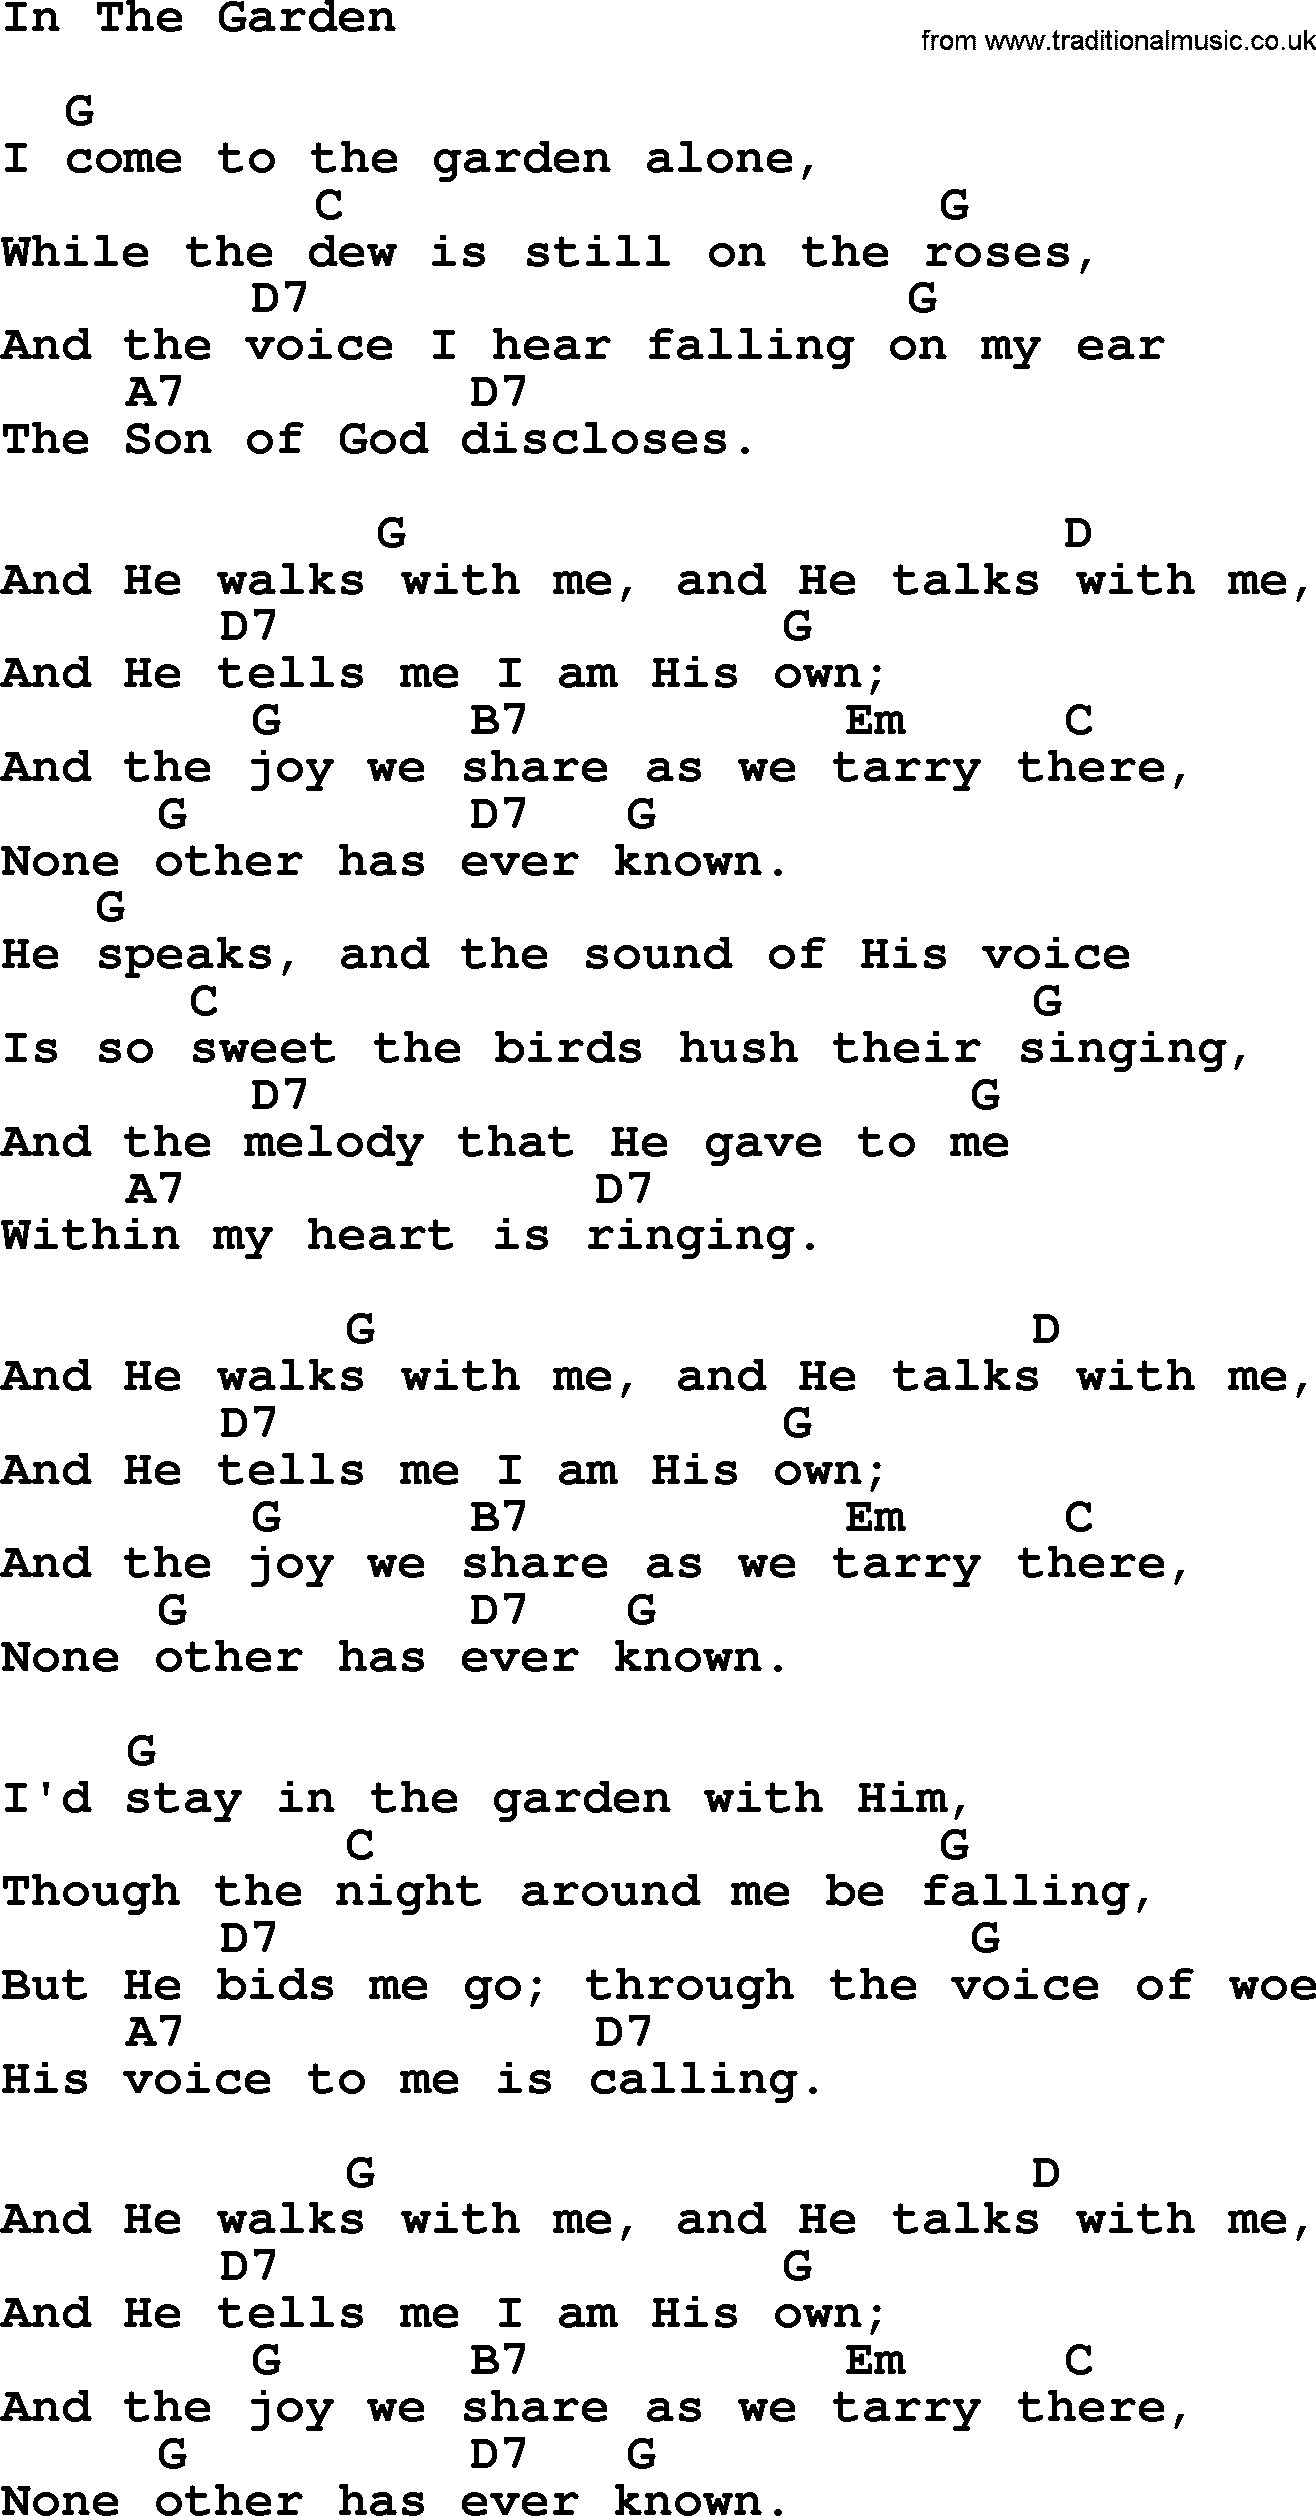 Top 1000 Most Popular Folk and Old-time Songs: In The Garden, lyrics and chords